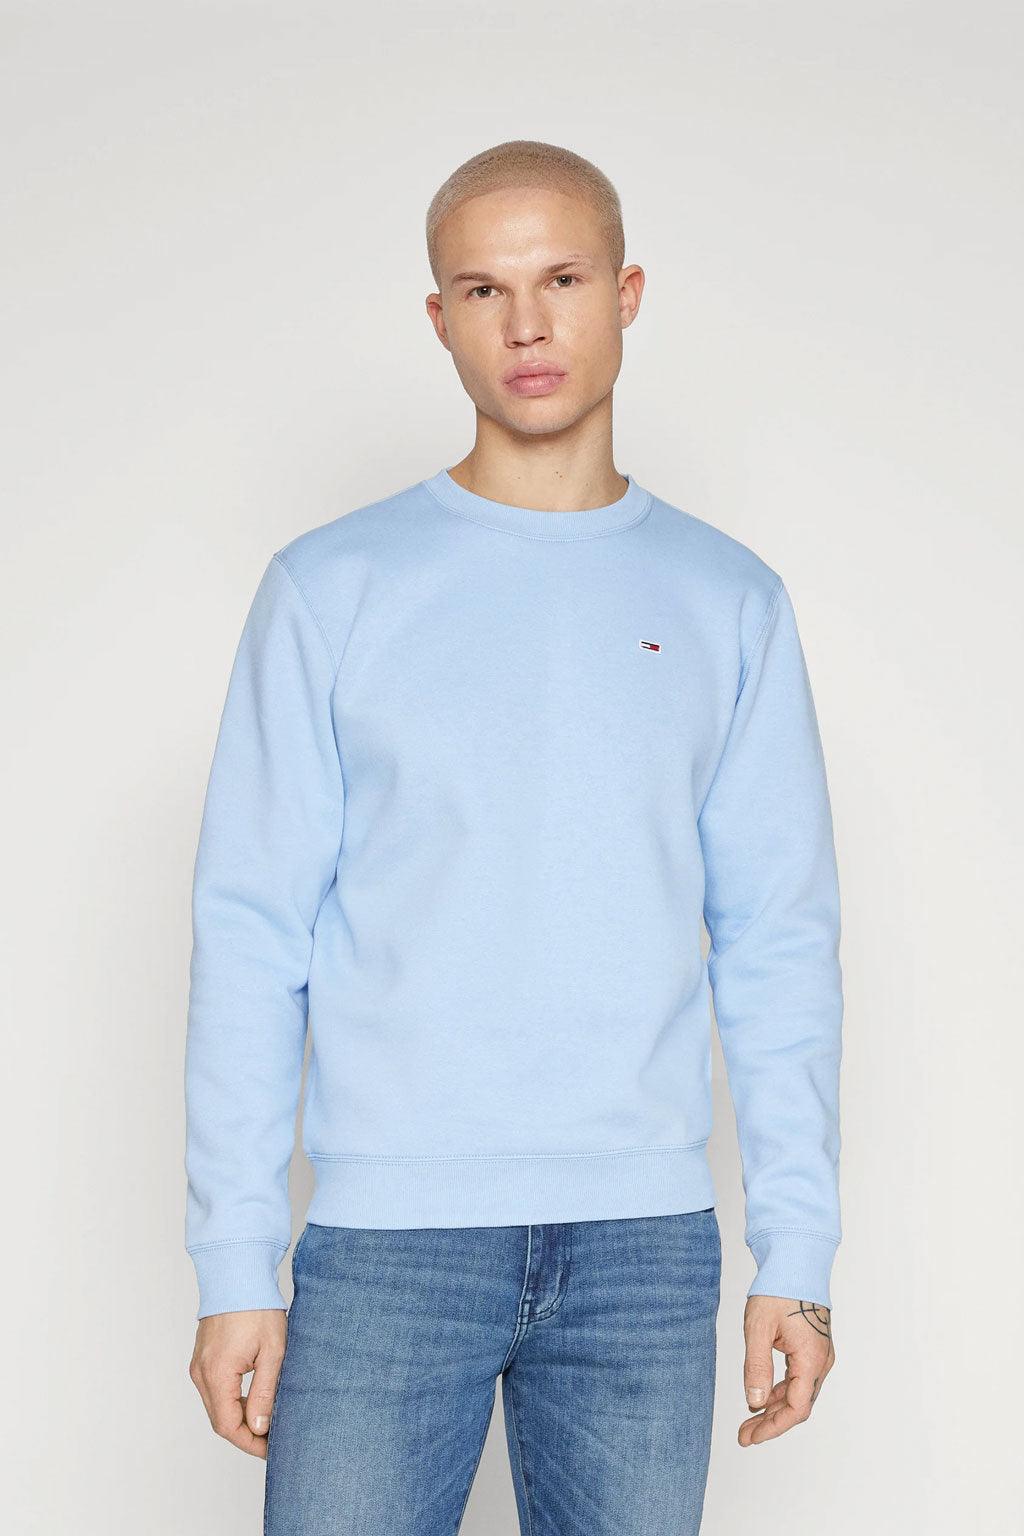 Tommy Jeans sweater - Big Boss | the menswear concept